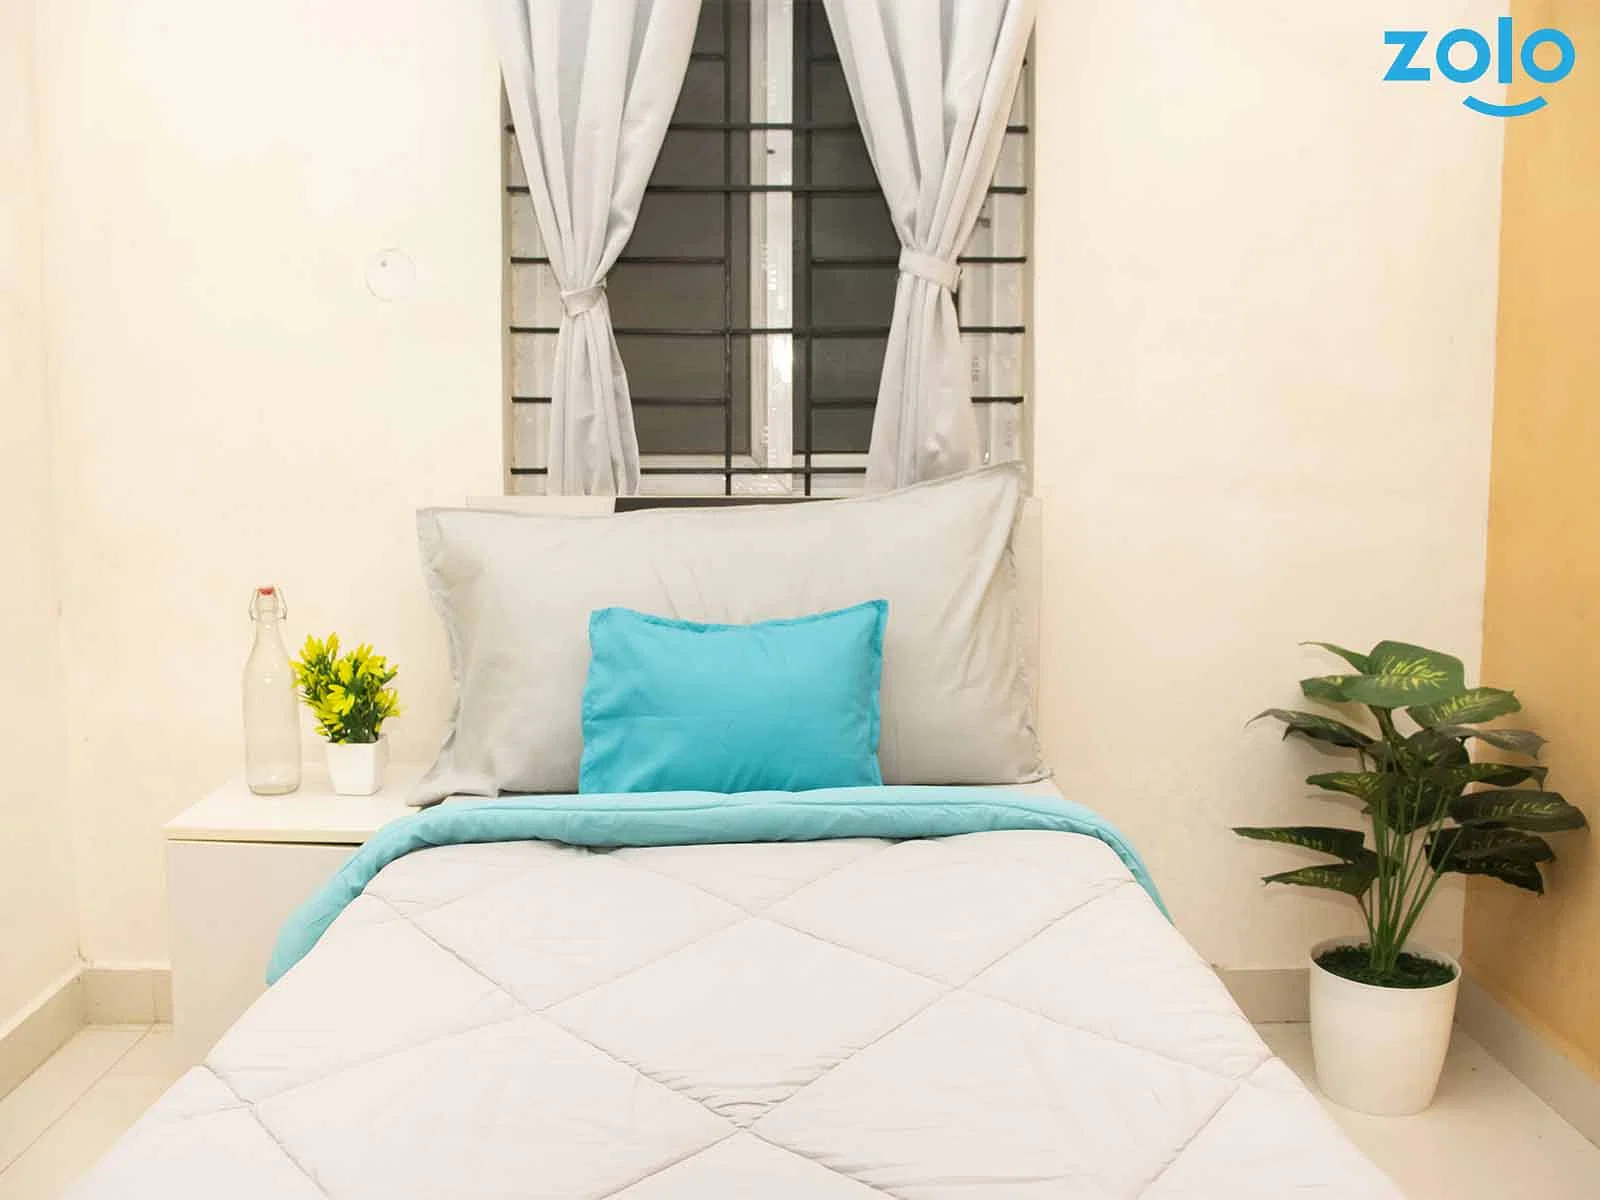 fully furnished Zolo single rooms for rent near me-check out now-Zolo Chronicle